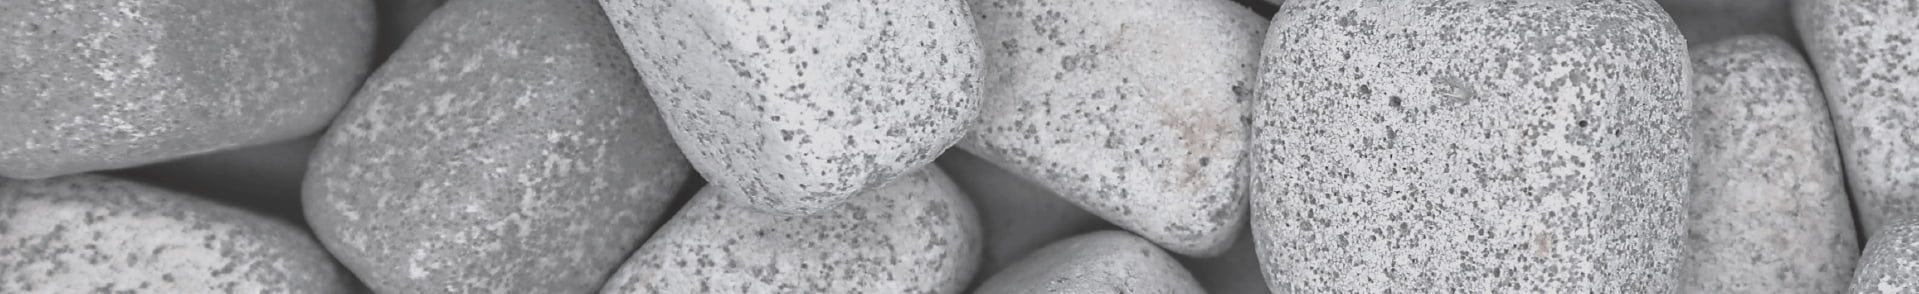 Artificial Pumice Stones | environmental protection pumice